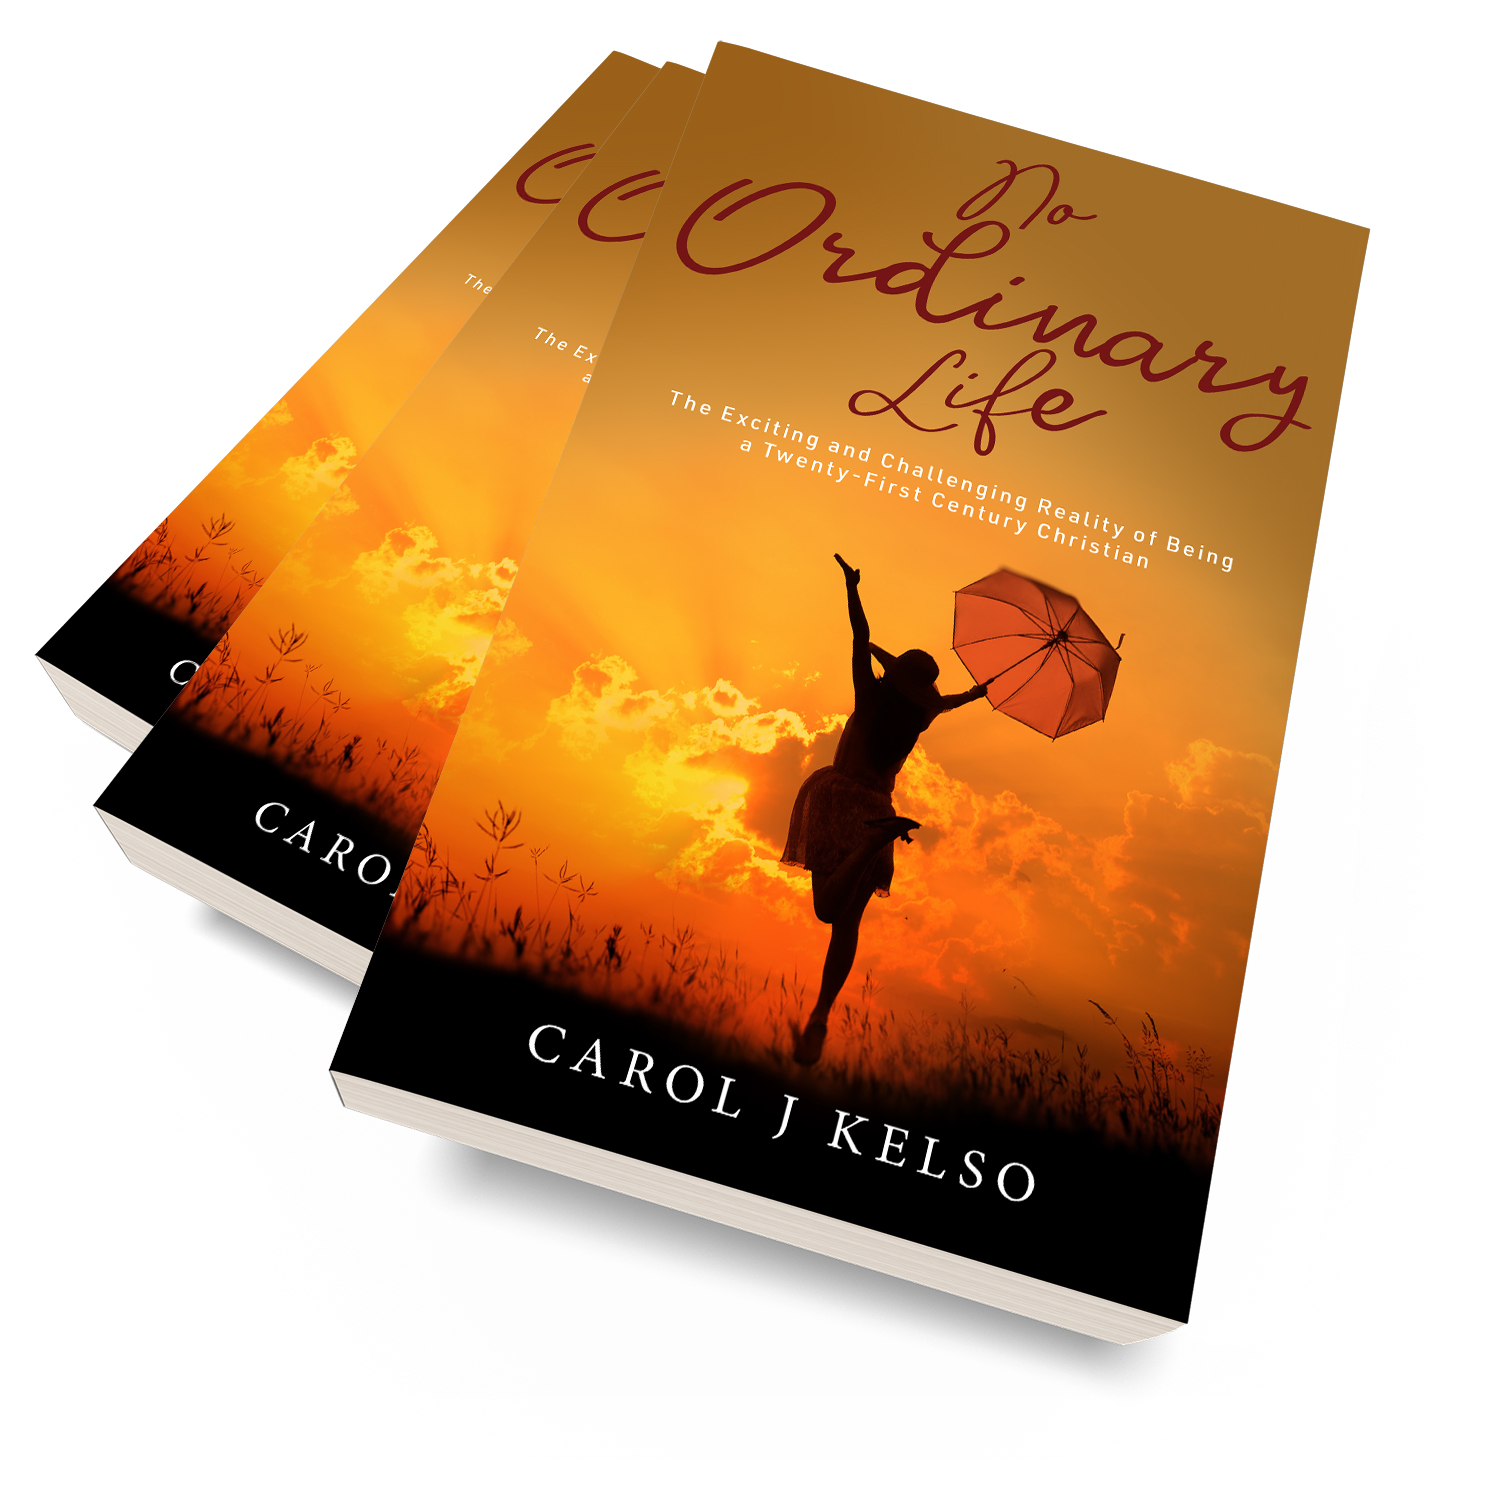 'No Ordinary Life' is a great book about living a 21st Century faith-based life, by author Carol J Kelso. The book cover and interior were designed by Mark Thomas, of coverness.com. To find out more about my book design services, please visit www.coverness.com.